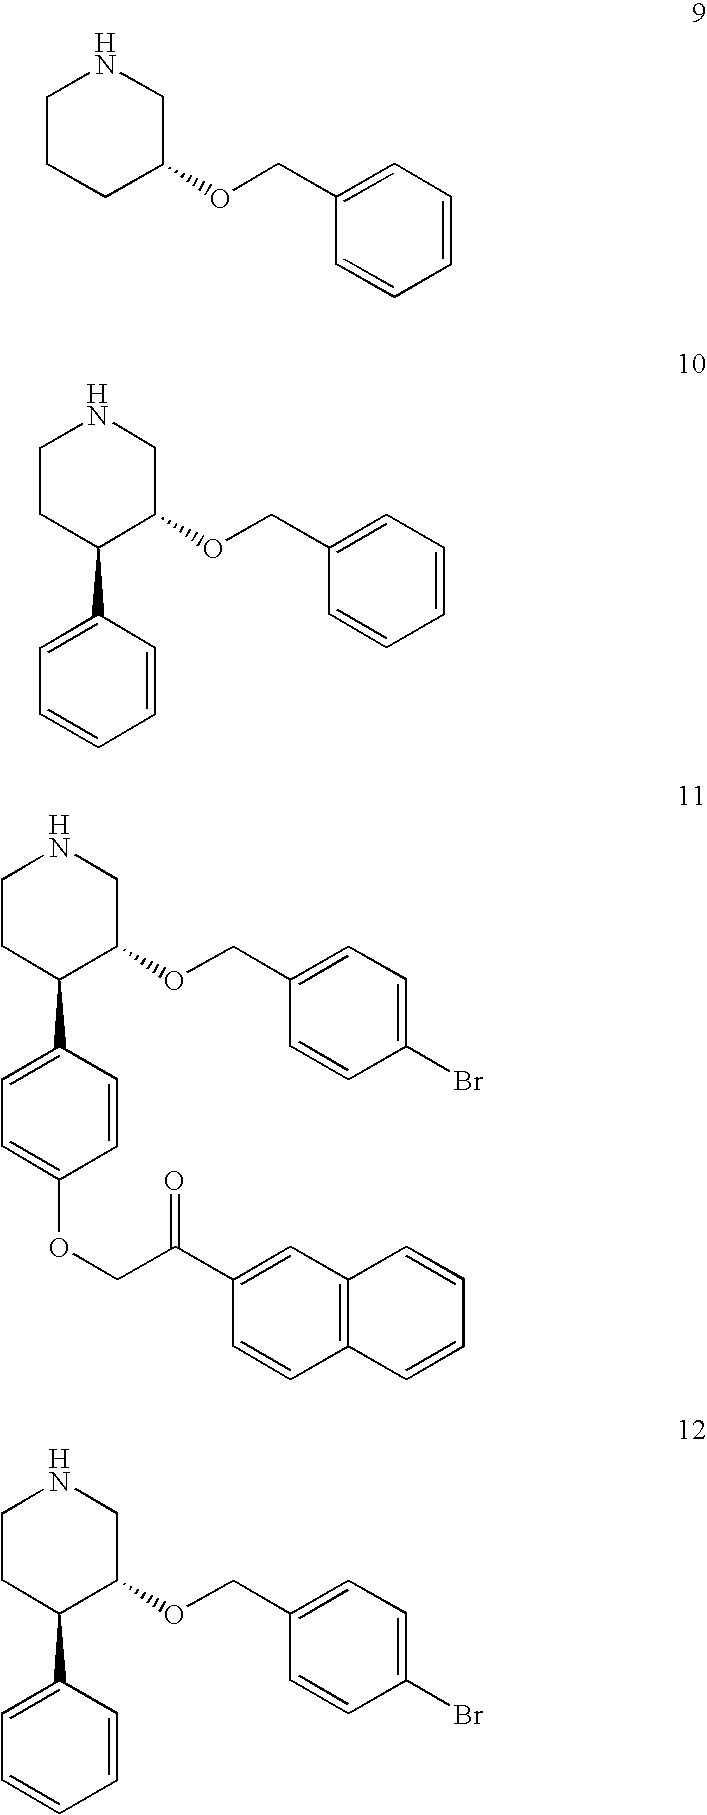 Method to design therapeutically important compounds